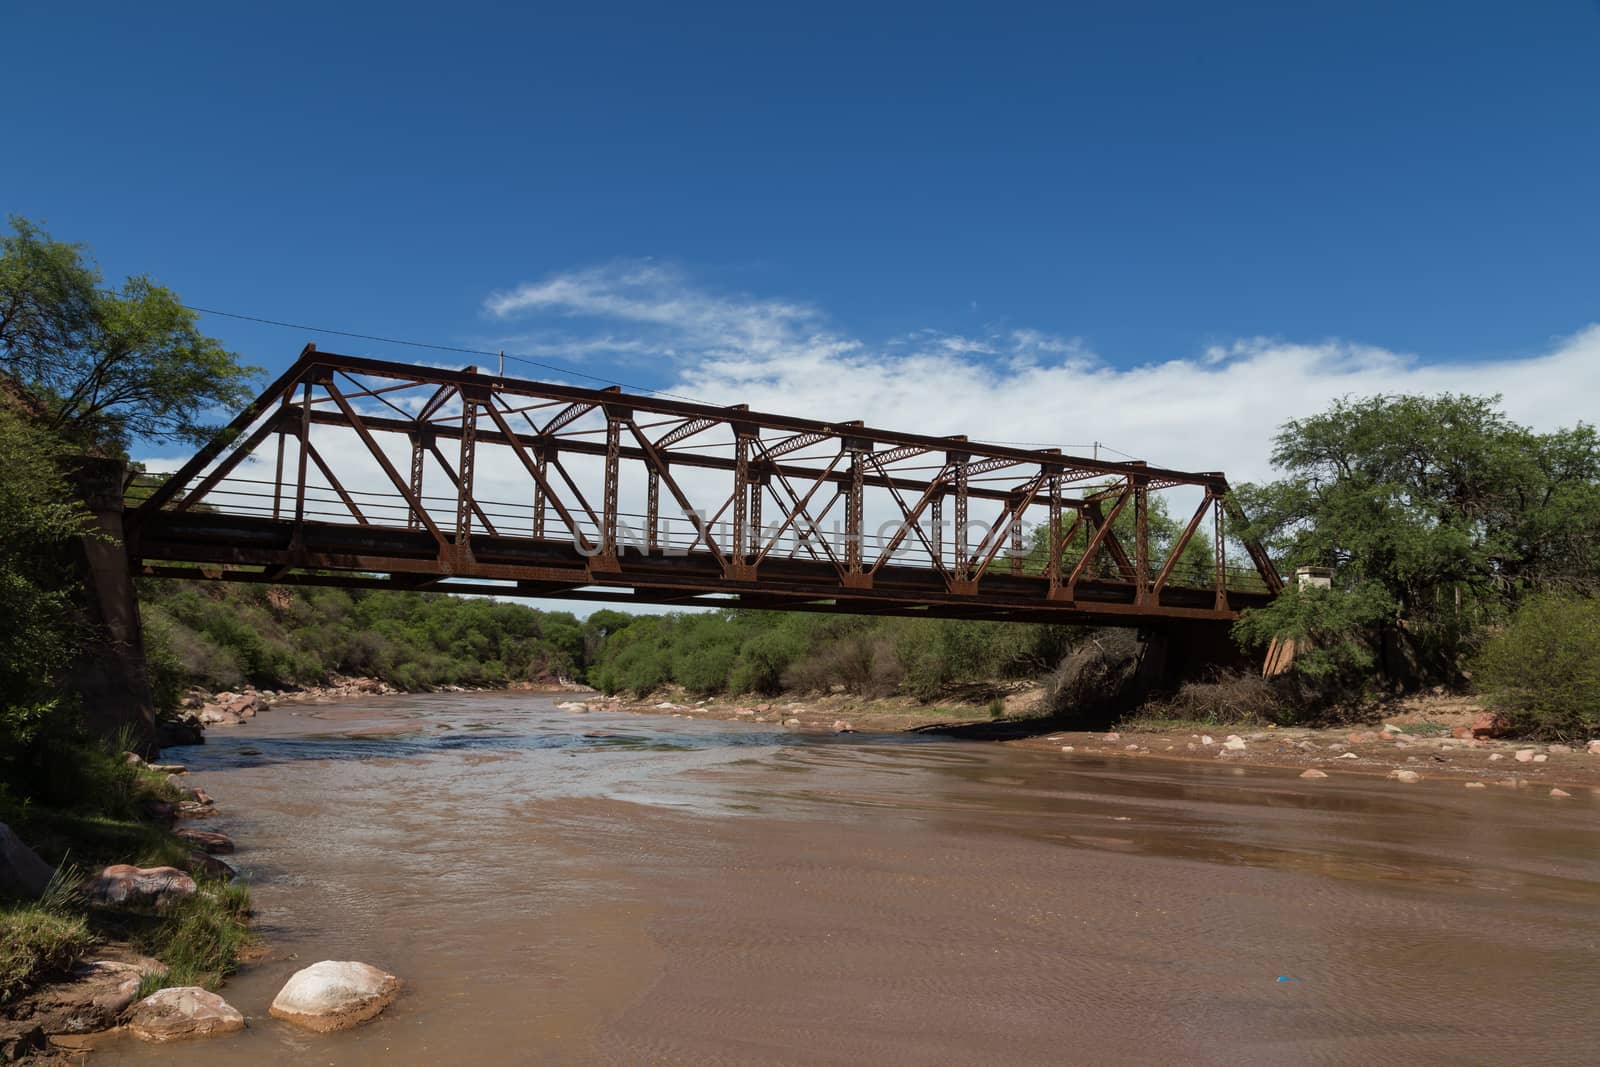 Photograph of a steel bridge construction over a river in the small village Alemania, Argentina.